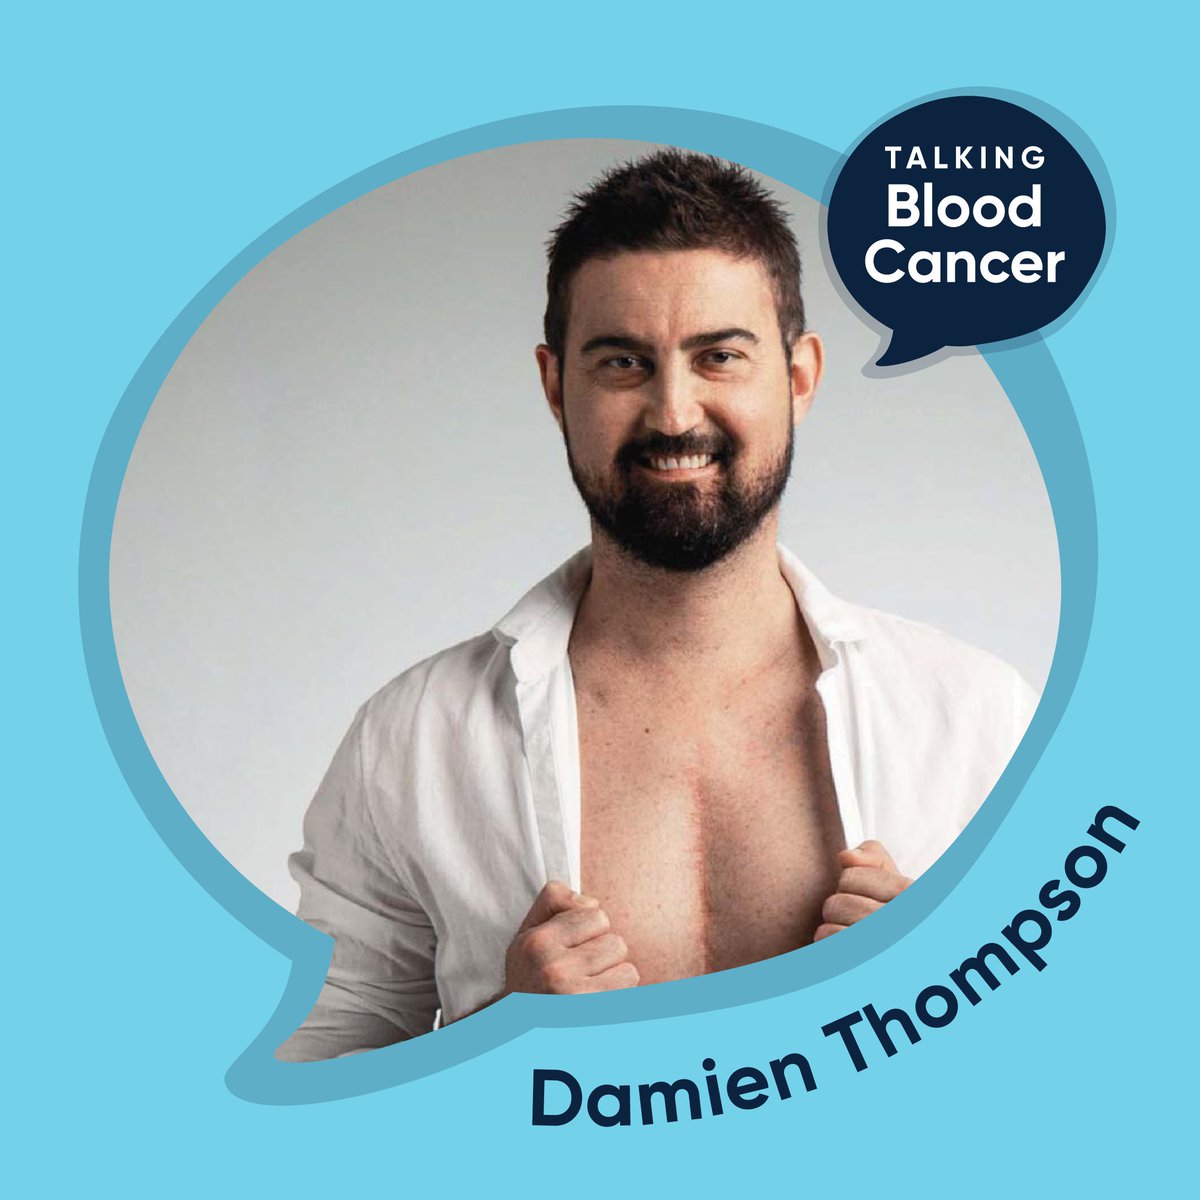 Damien Thompson was diagnosed with ALL in 2010 at the age of just 23. He shares pearls of wisdom about how he got through the challenging transplant. He also speaks about remembering to celebrate the small wins, as those small wins turn into big gains.💙rebrand.ly/talking-blood-…